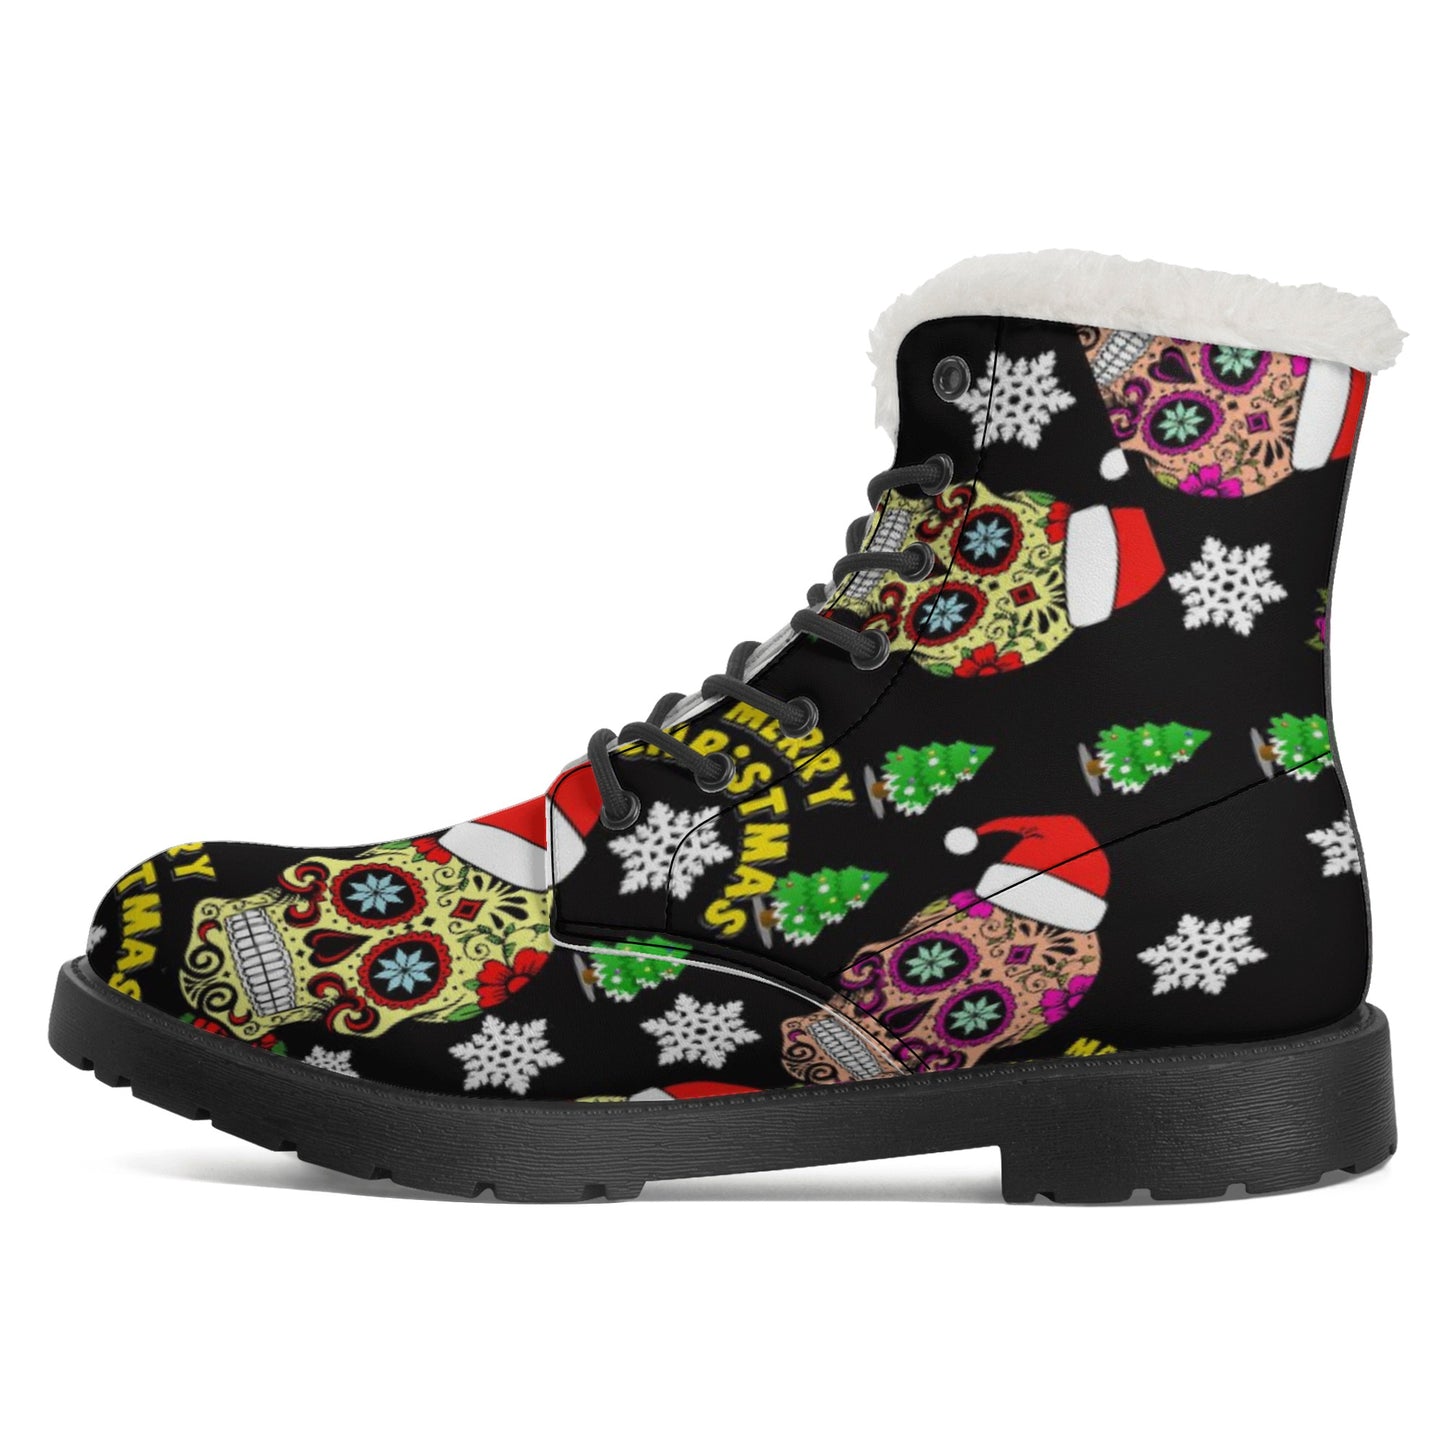 Merry christmas sugar skull Women's Faux Fur Leather Boots